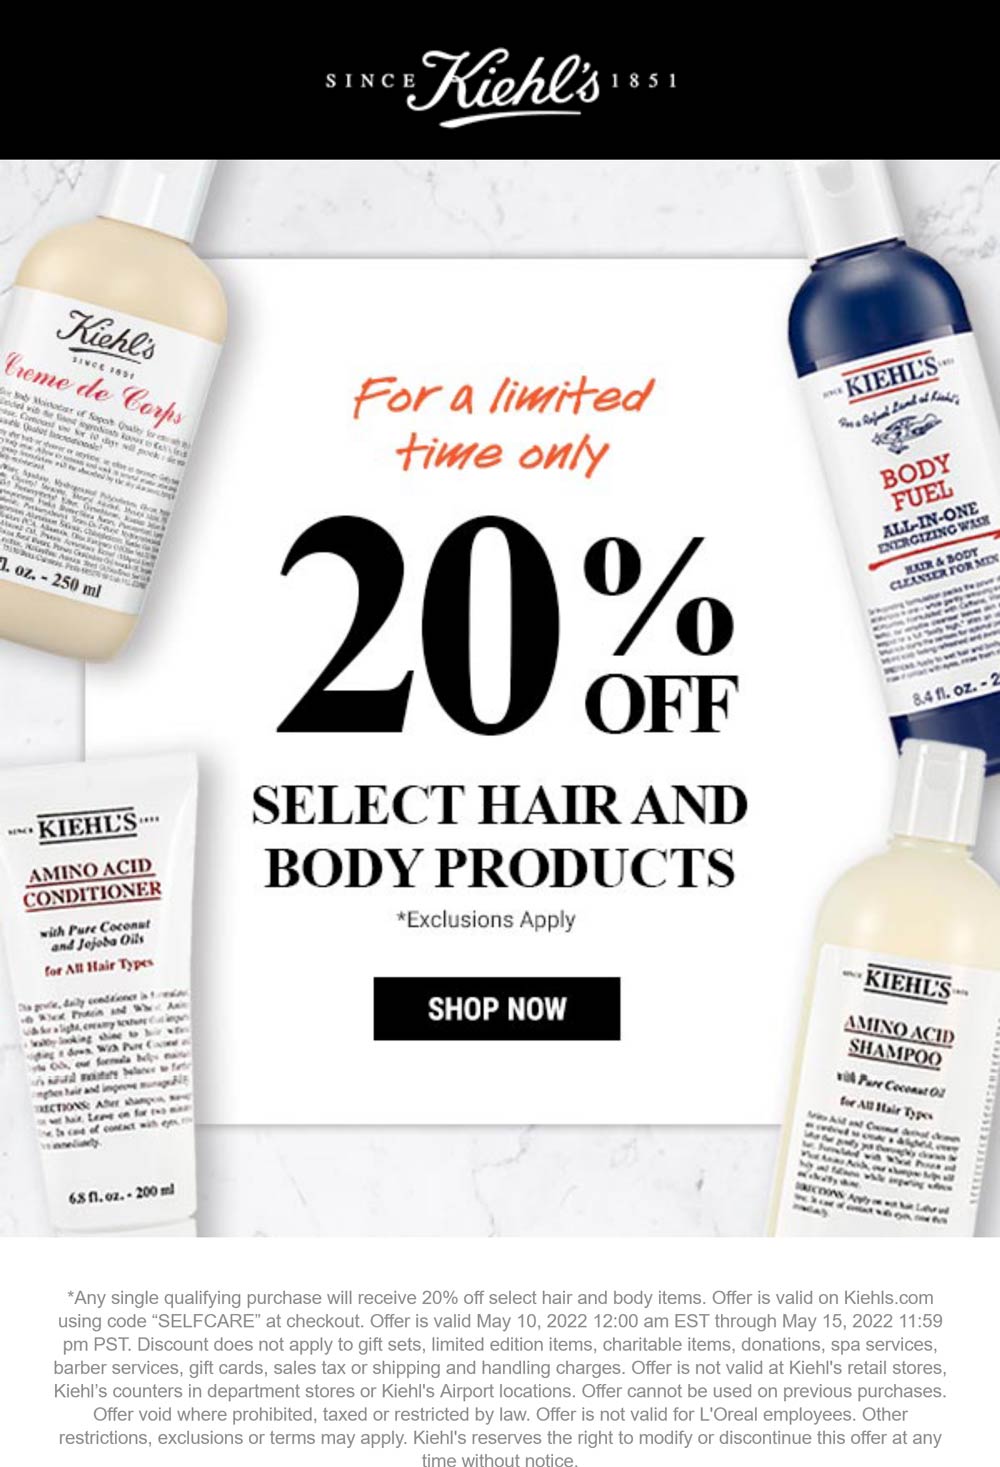 Kiehls coupons & promo code for [August 2022]